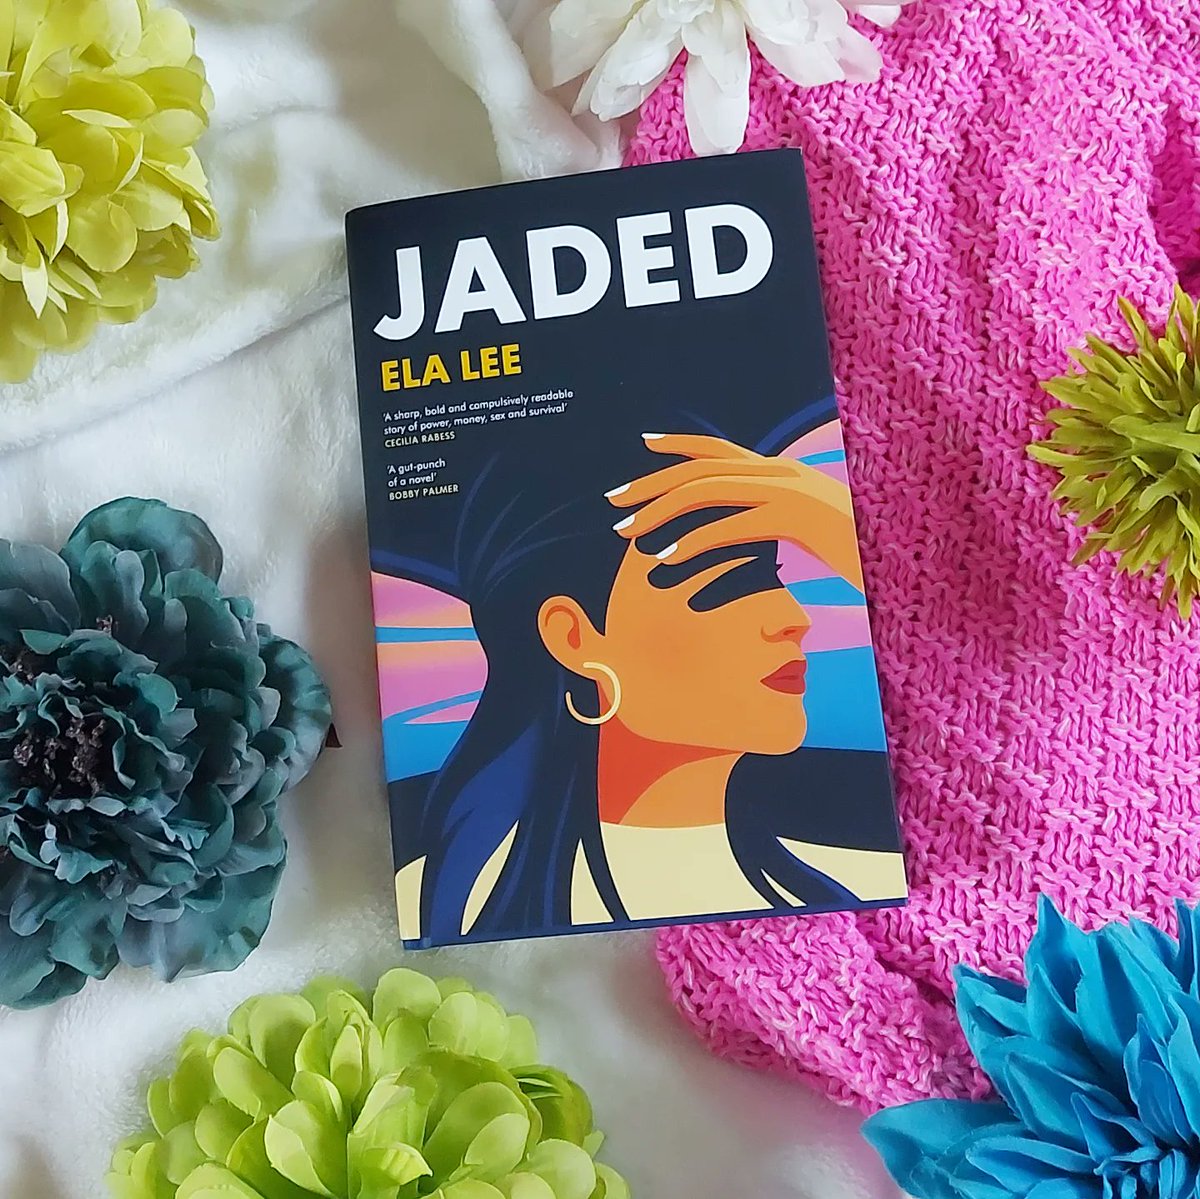 My review of #Jaded by #ElaLee us on Instagram as part of the @instabooktours #blogtour A page-turner that packs a real punch, holding a mirror up at some hard-hitting issues, Jaded is out now. Thanks to @HarvillSecker for my copy. instagram.com/p/C3hQp2KoNPf/…